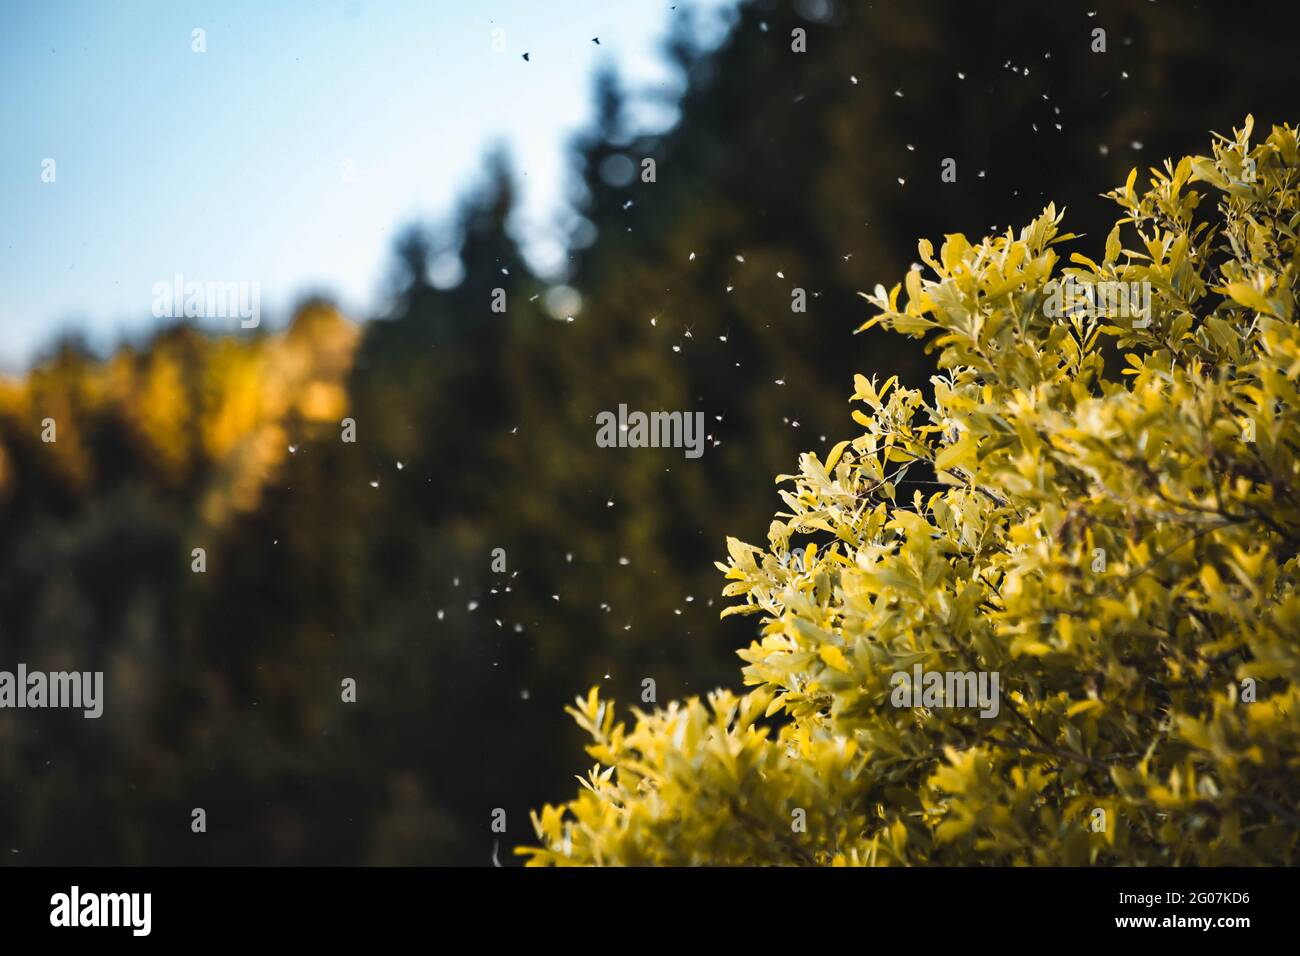 Mosquitoes swarm in the air. Tree branches on the side Stock Photo